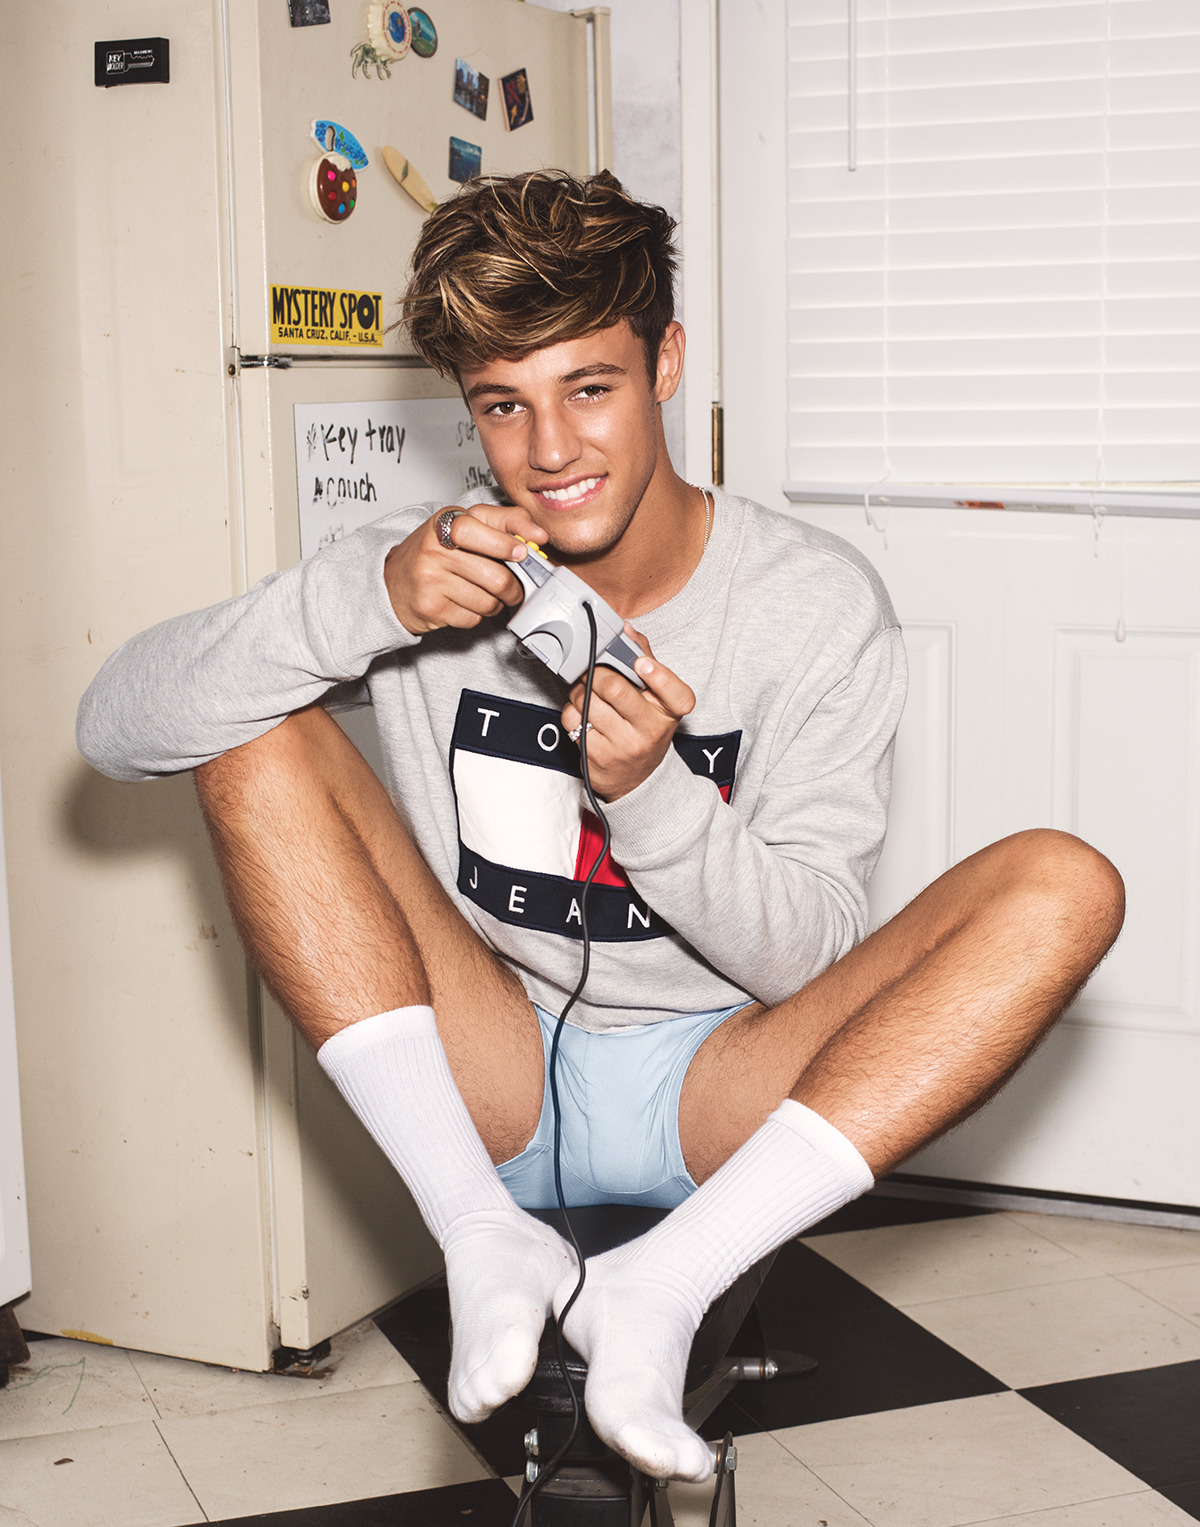 Cameron Dallas | By: Justin Campbell
ROLLACOASTER | AW/17